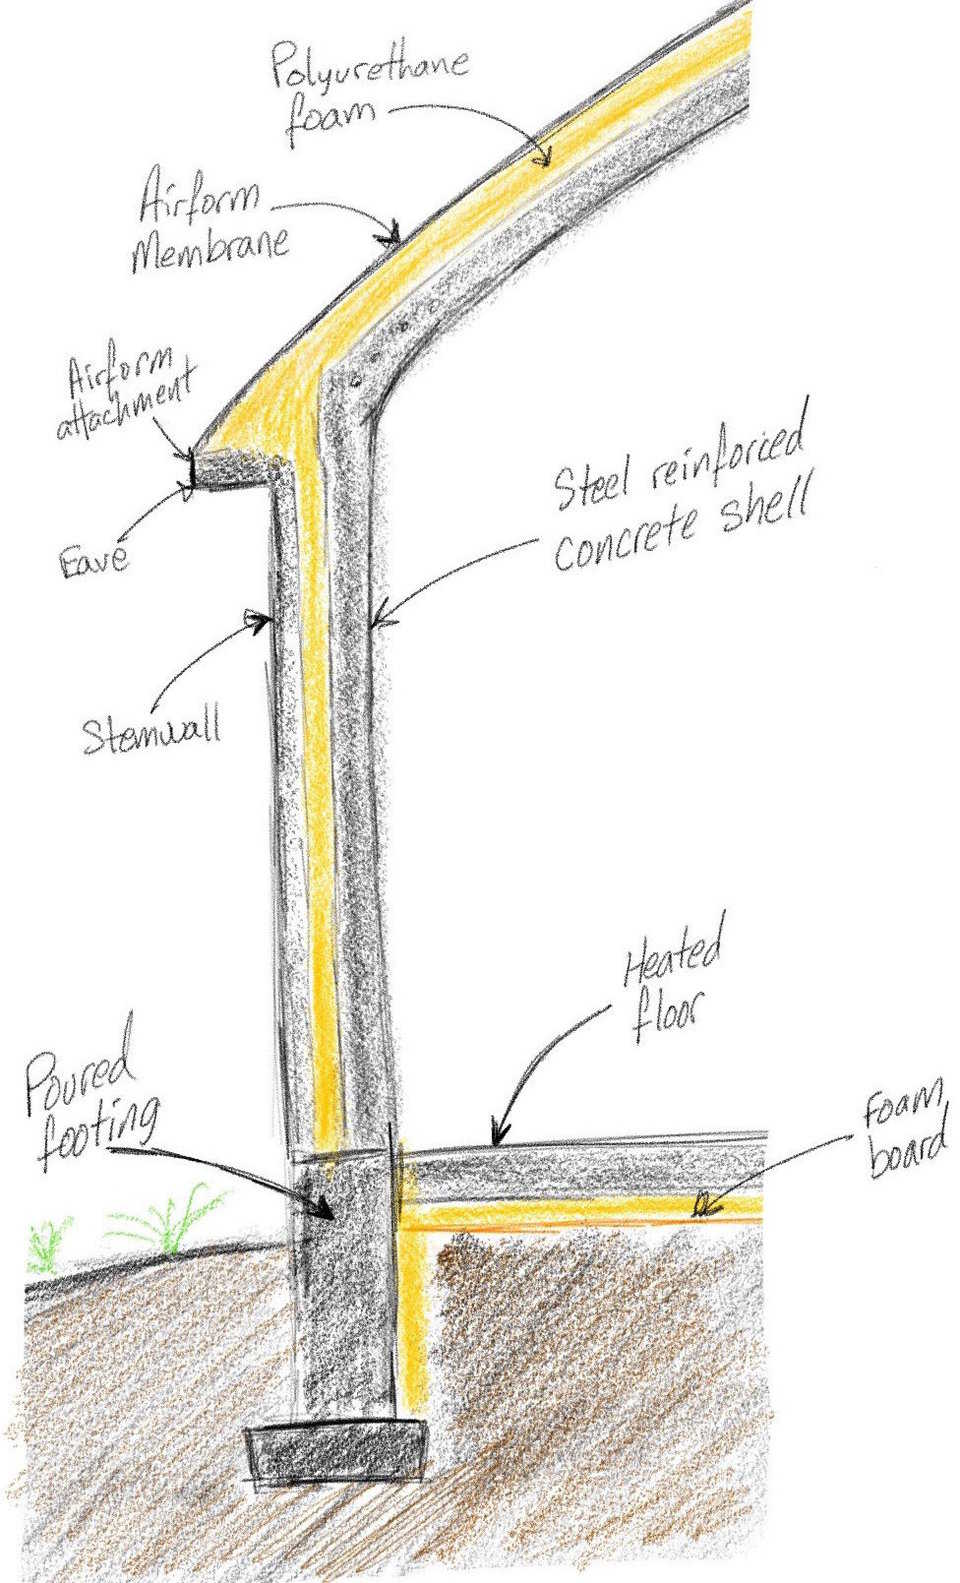 Quick sketch of Arcadia wall cross-section. The stemware and eave are formed with plywood and shot in place with concrete. The Airform membrane is attached and inflated. The foam and structural concrete are applied in successive layers.